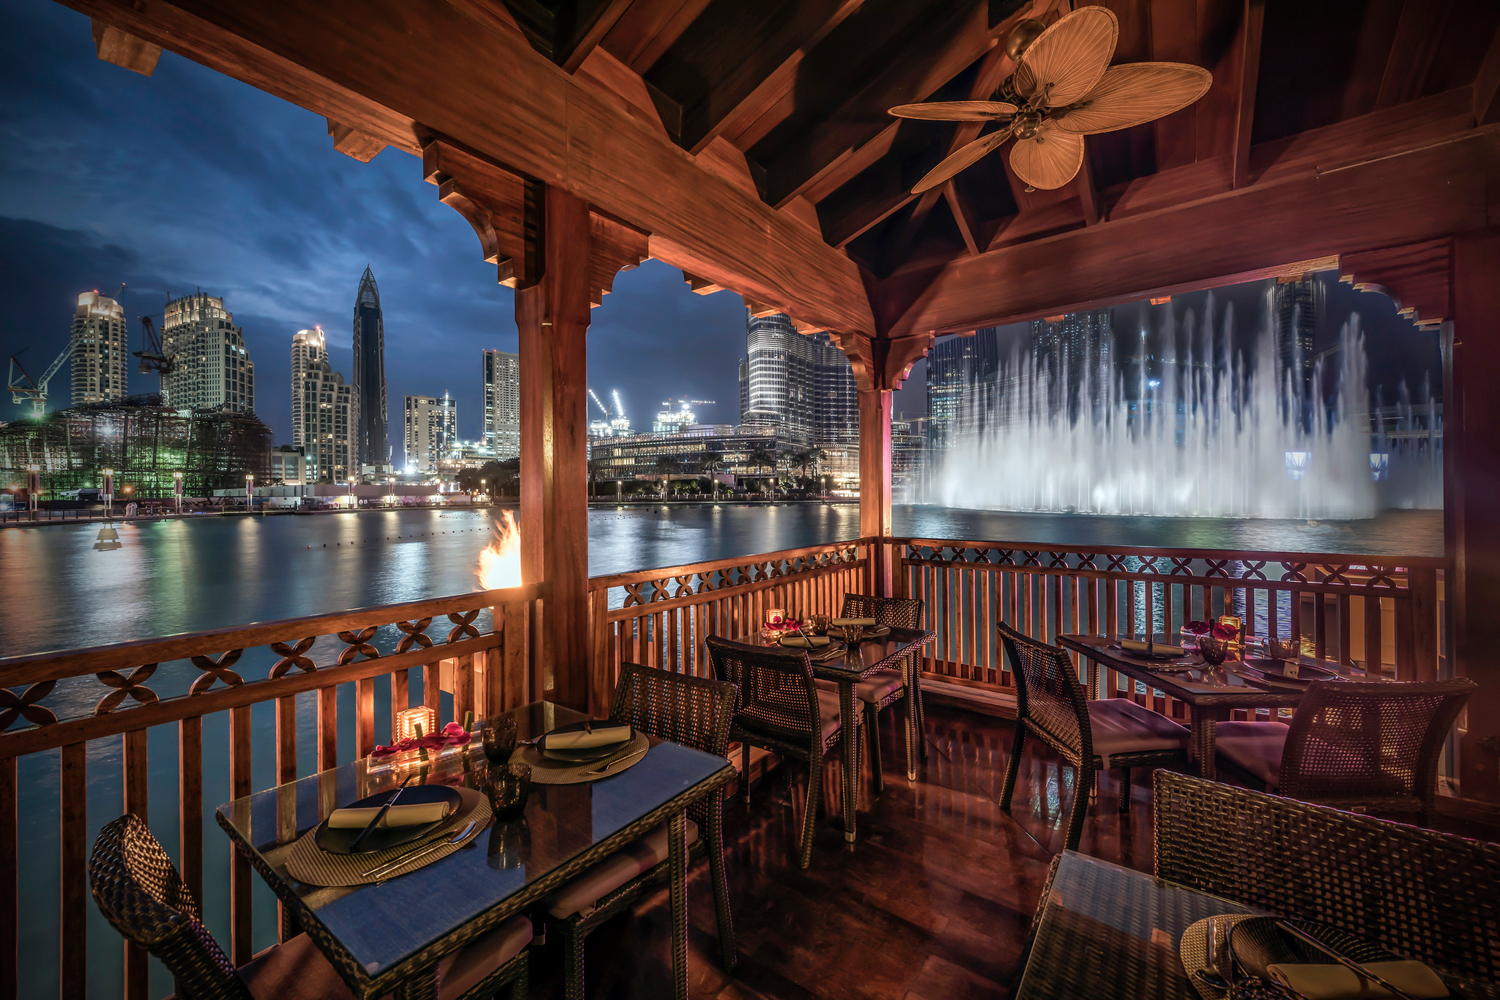 6 Romantic Restaurants In Dubai That Will Make You Swoon | Life